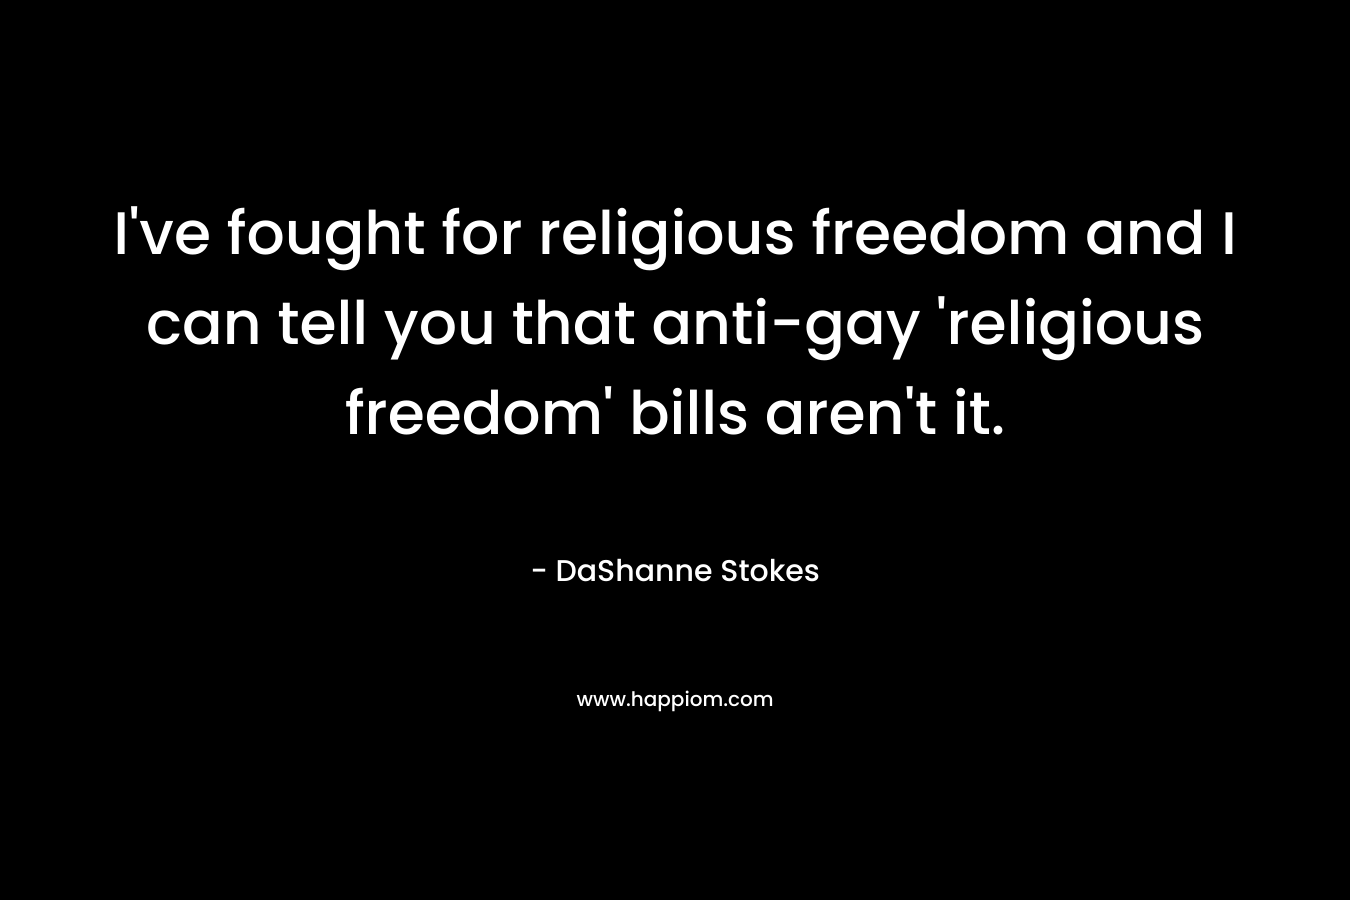 I've fought for religious freedom and I can tell you that anti-gay 'religious freedom' bills aren't it.